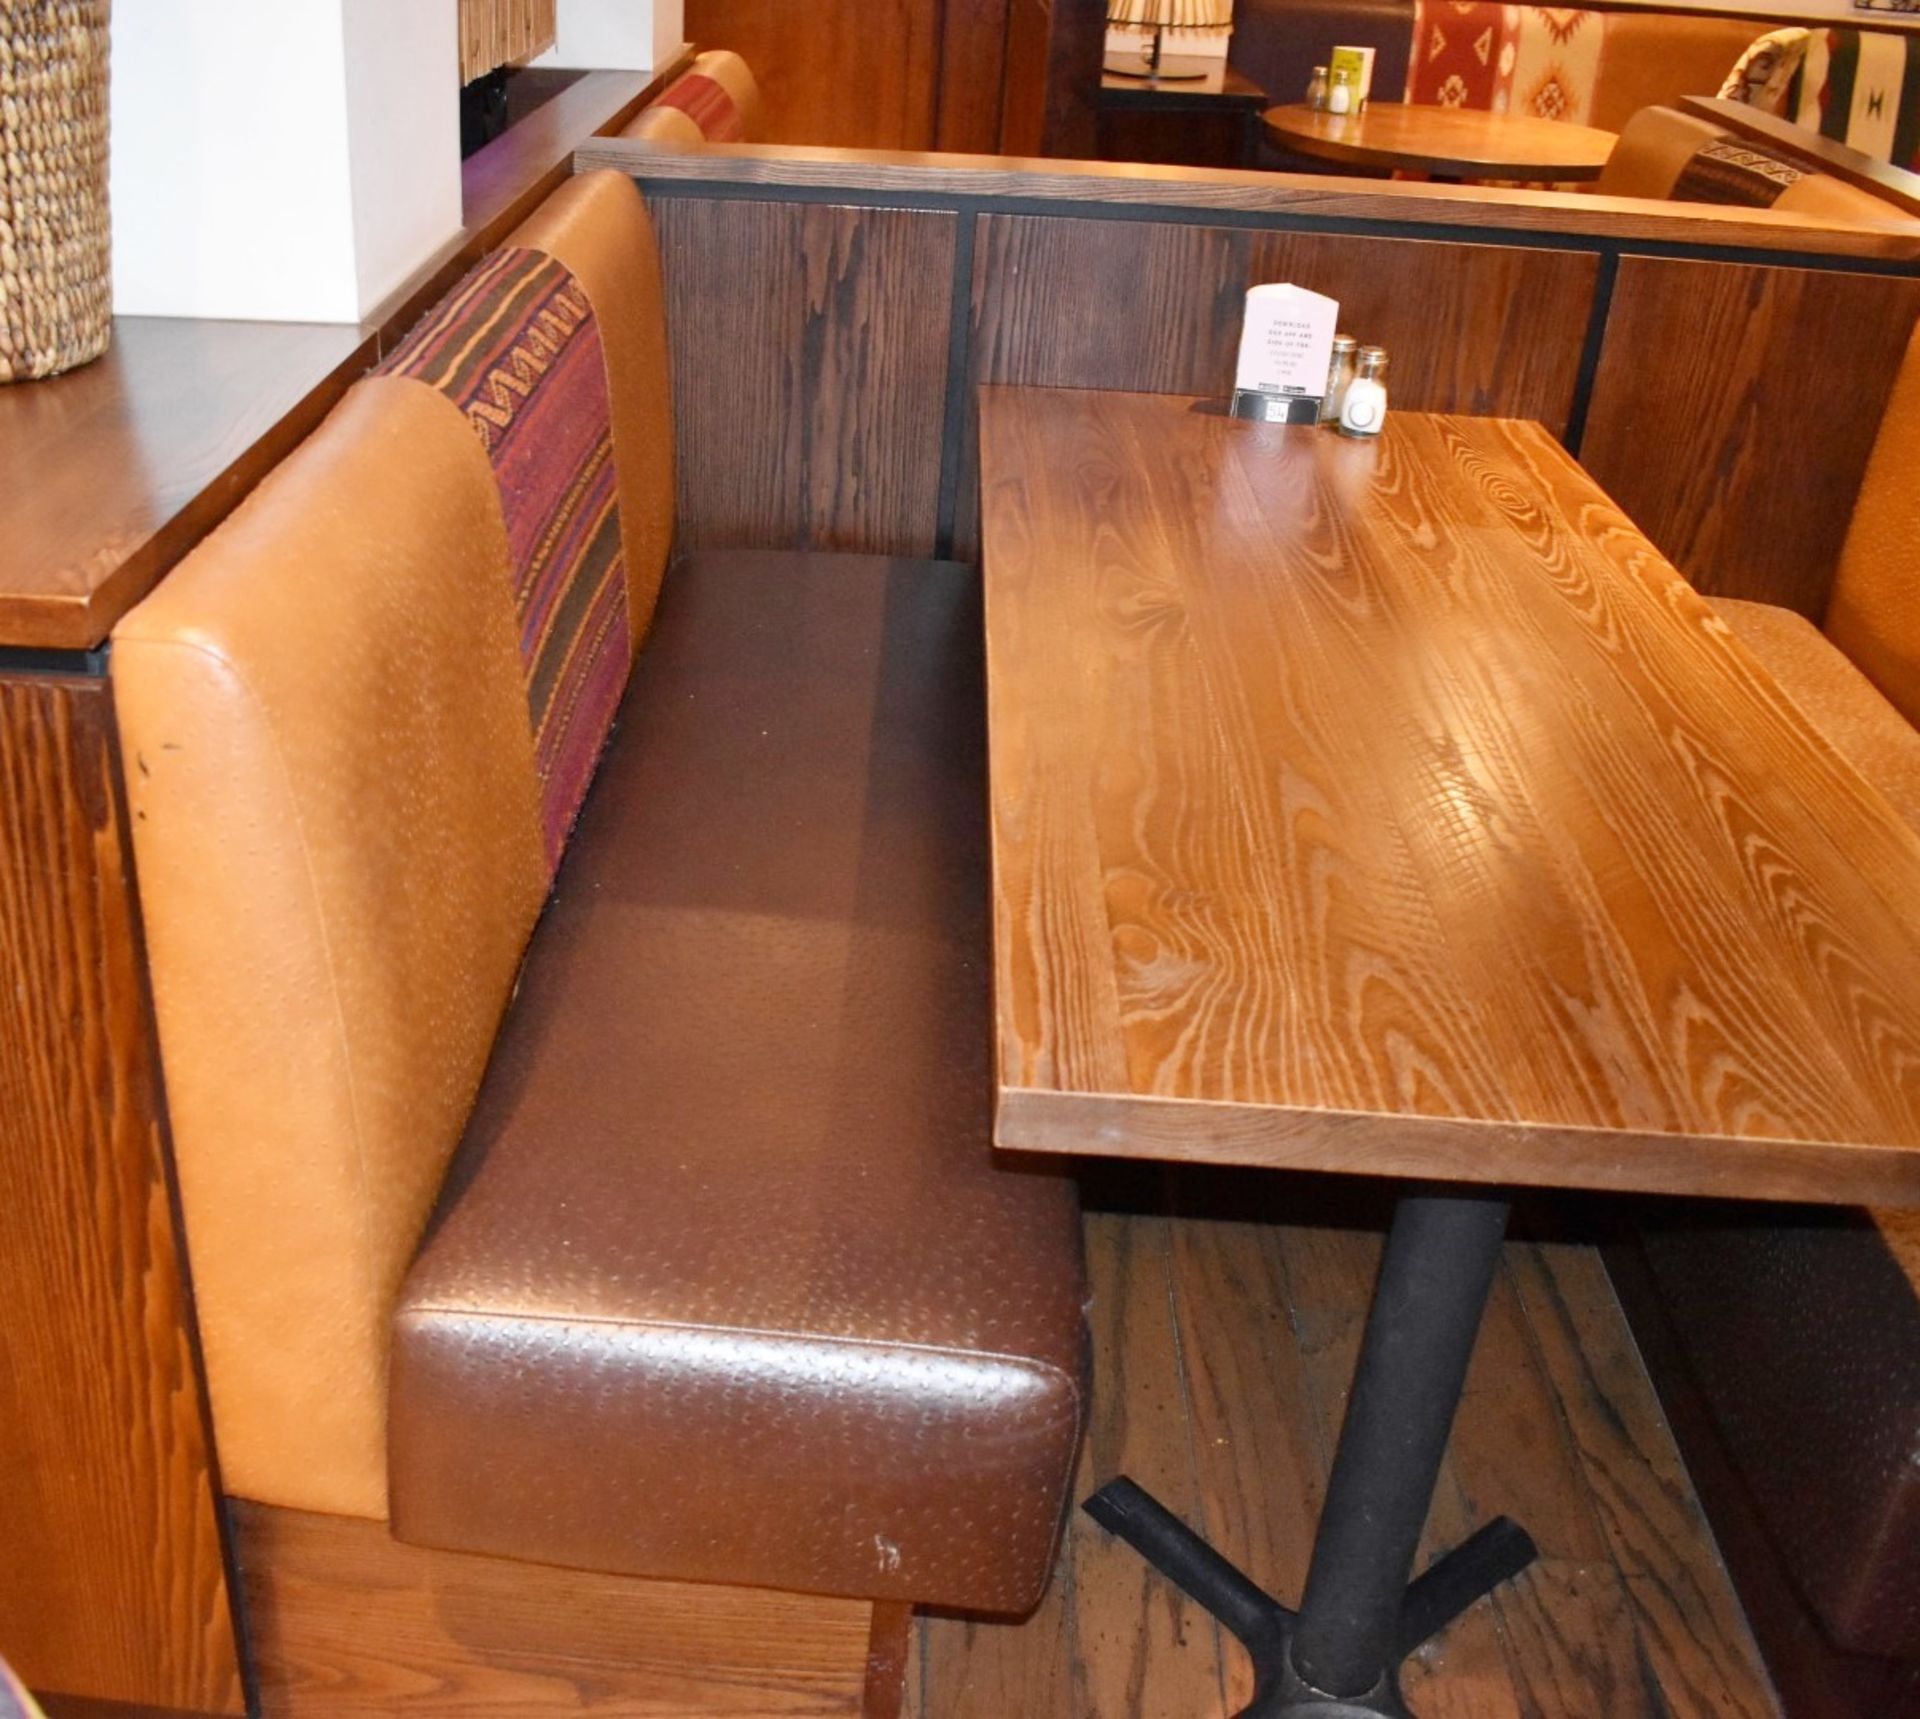 15-Pieces Of Restaurant Booth Seating Of Varying Length - Image 10 of 22